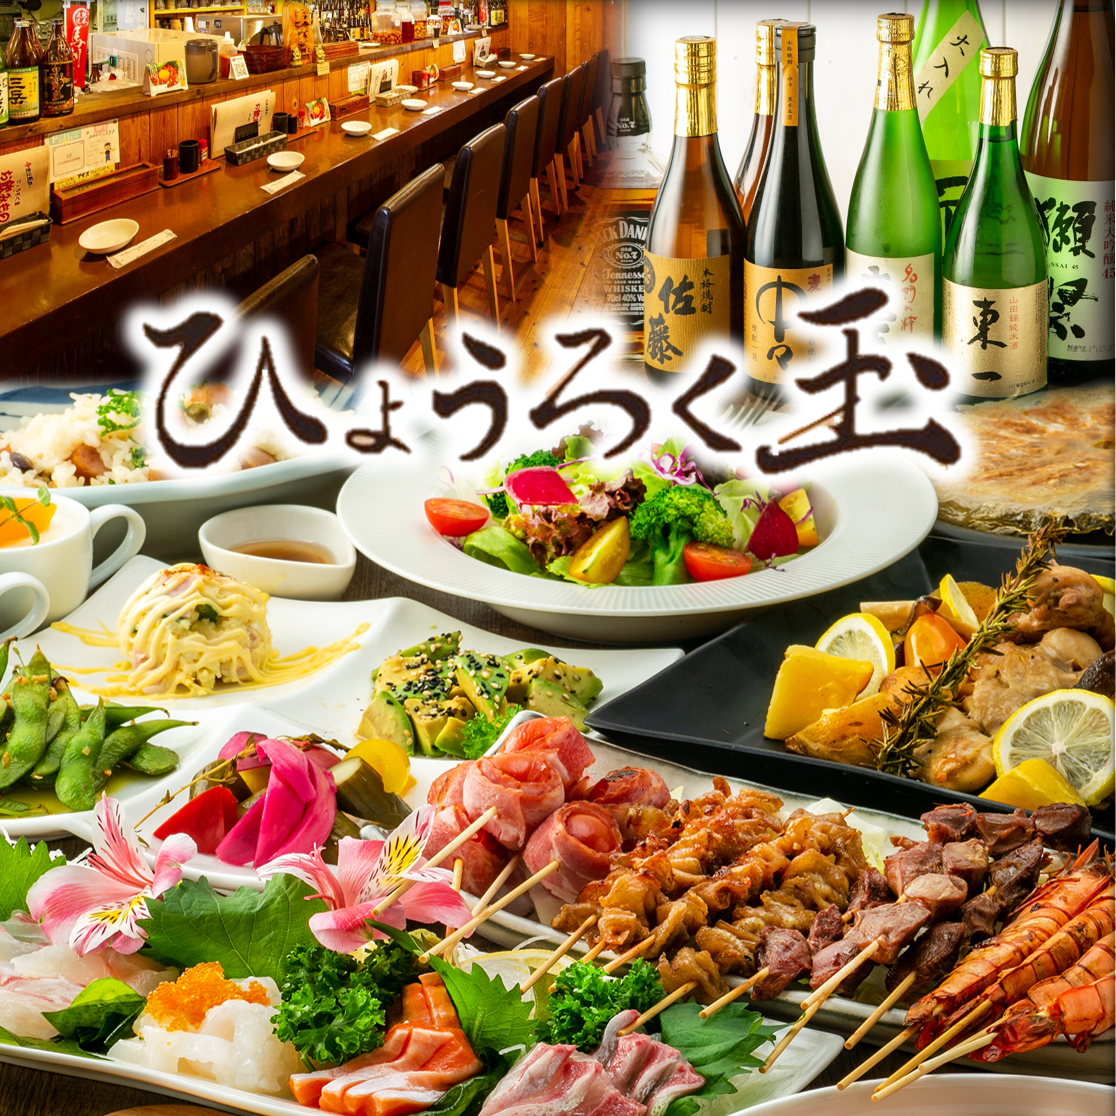 You can enjoy delicious Japanese food, Chinese food, and sake together ◎